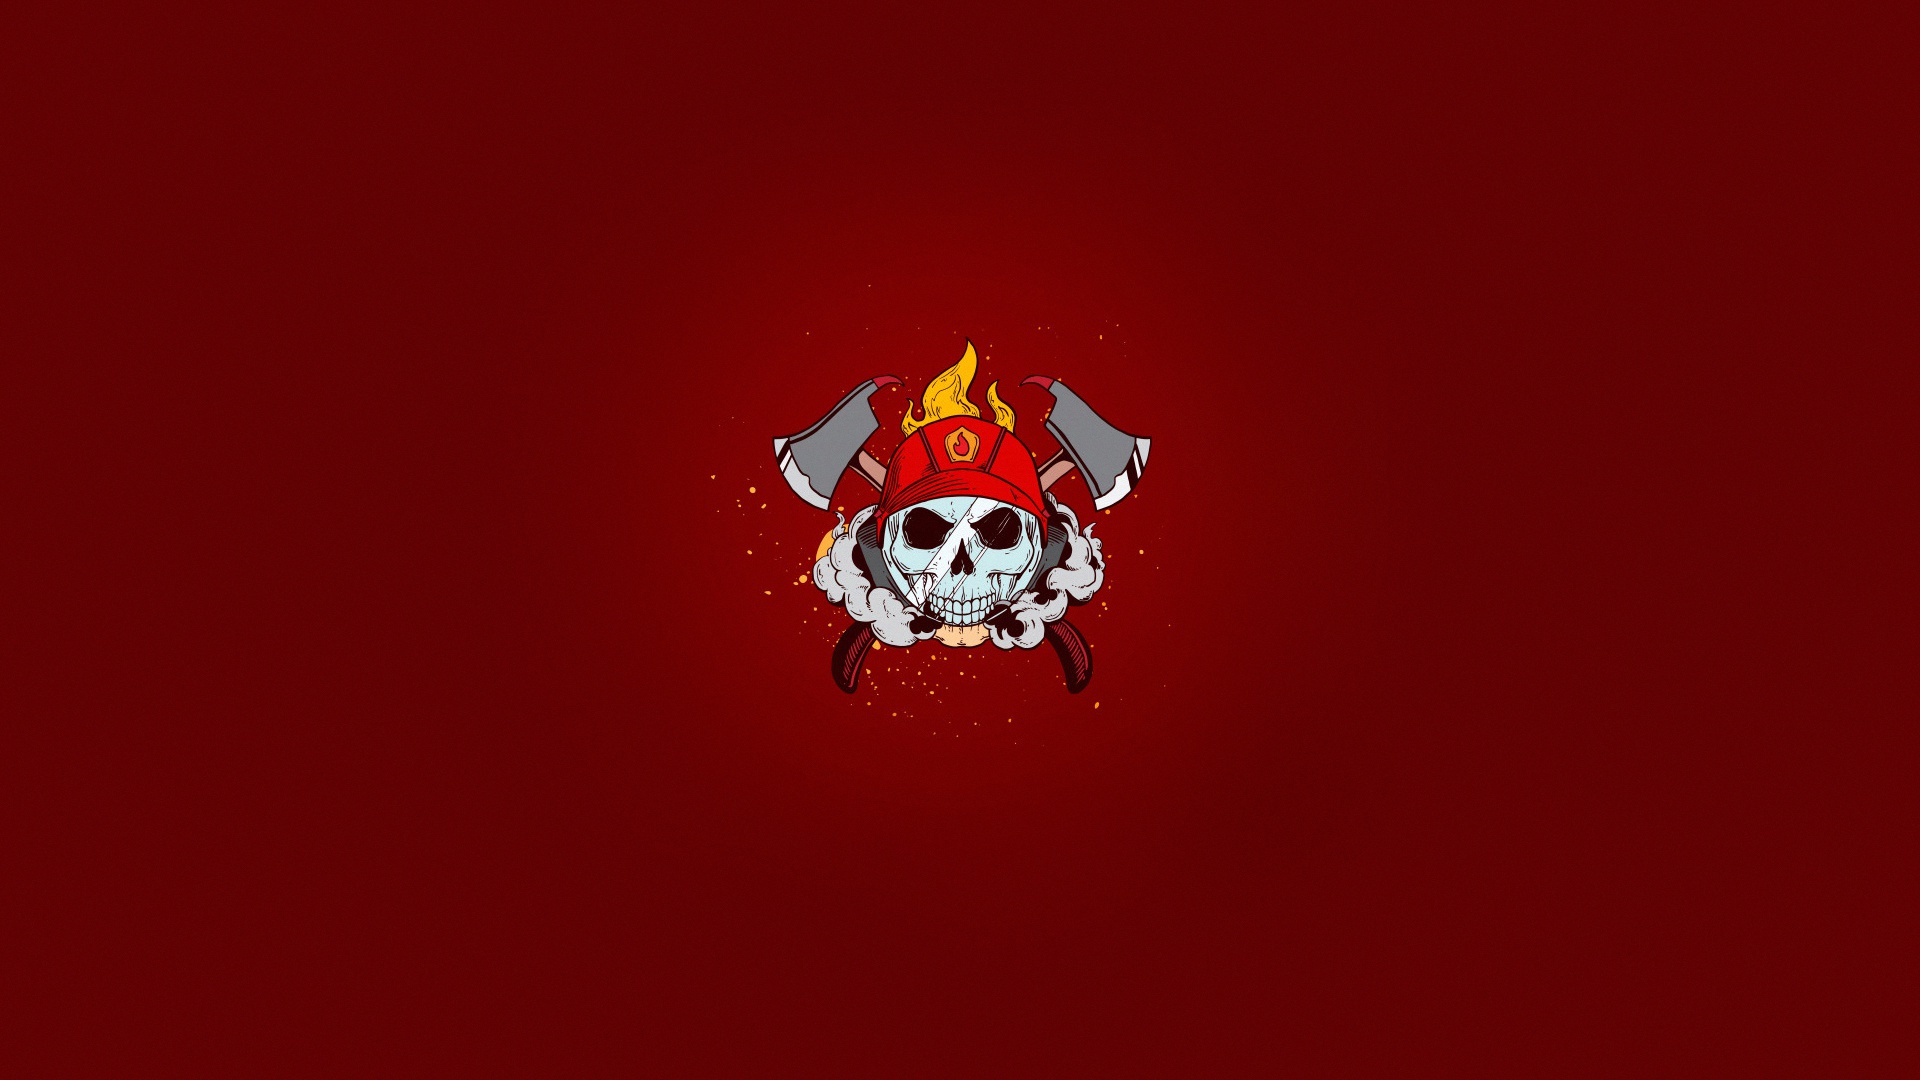 General 1920x1080 red background simple background artwork skull red axes